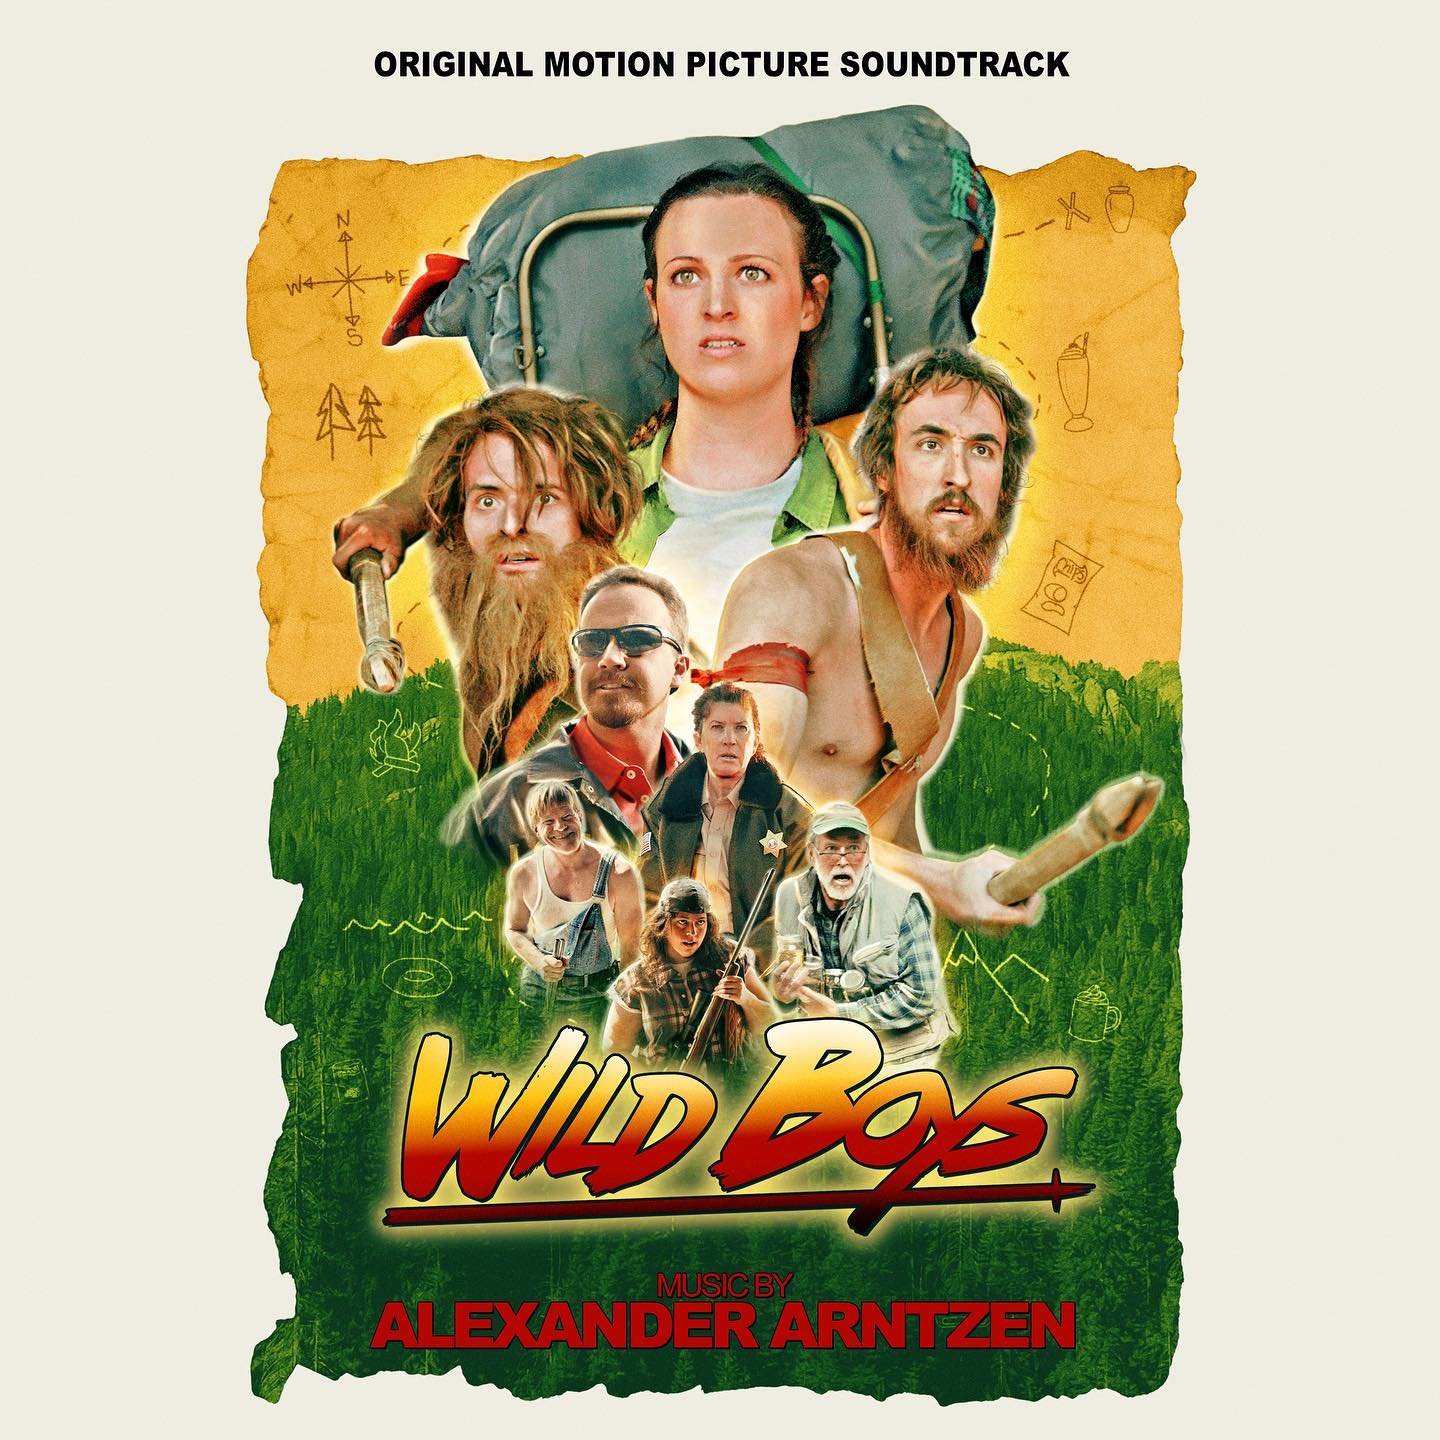 The Soundtrack for @wildboysmovie is finally here!!! This is truly one of my best and favorite scores I&rsquo;ve had the joy to create. A mix of 90s synths, tribal drums, country twang, &amp; even a dash of my own voice singing some of the melodies. 